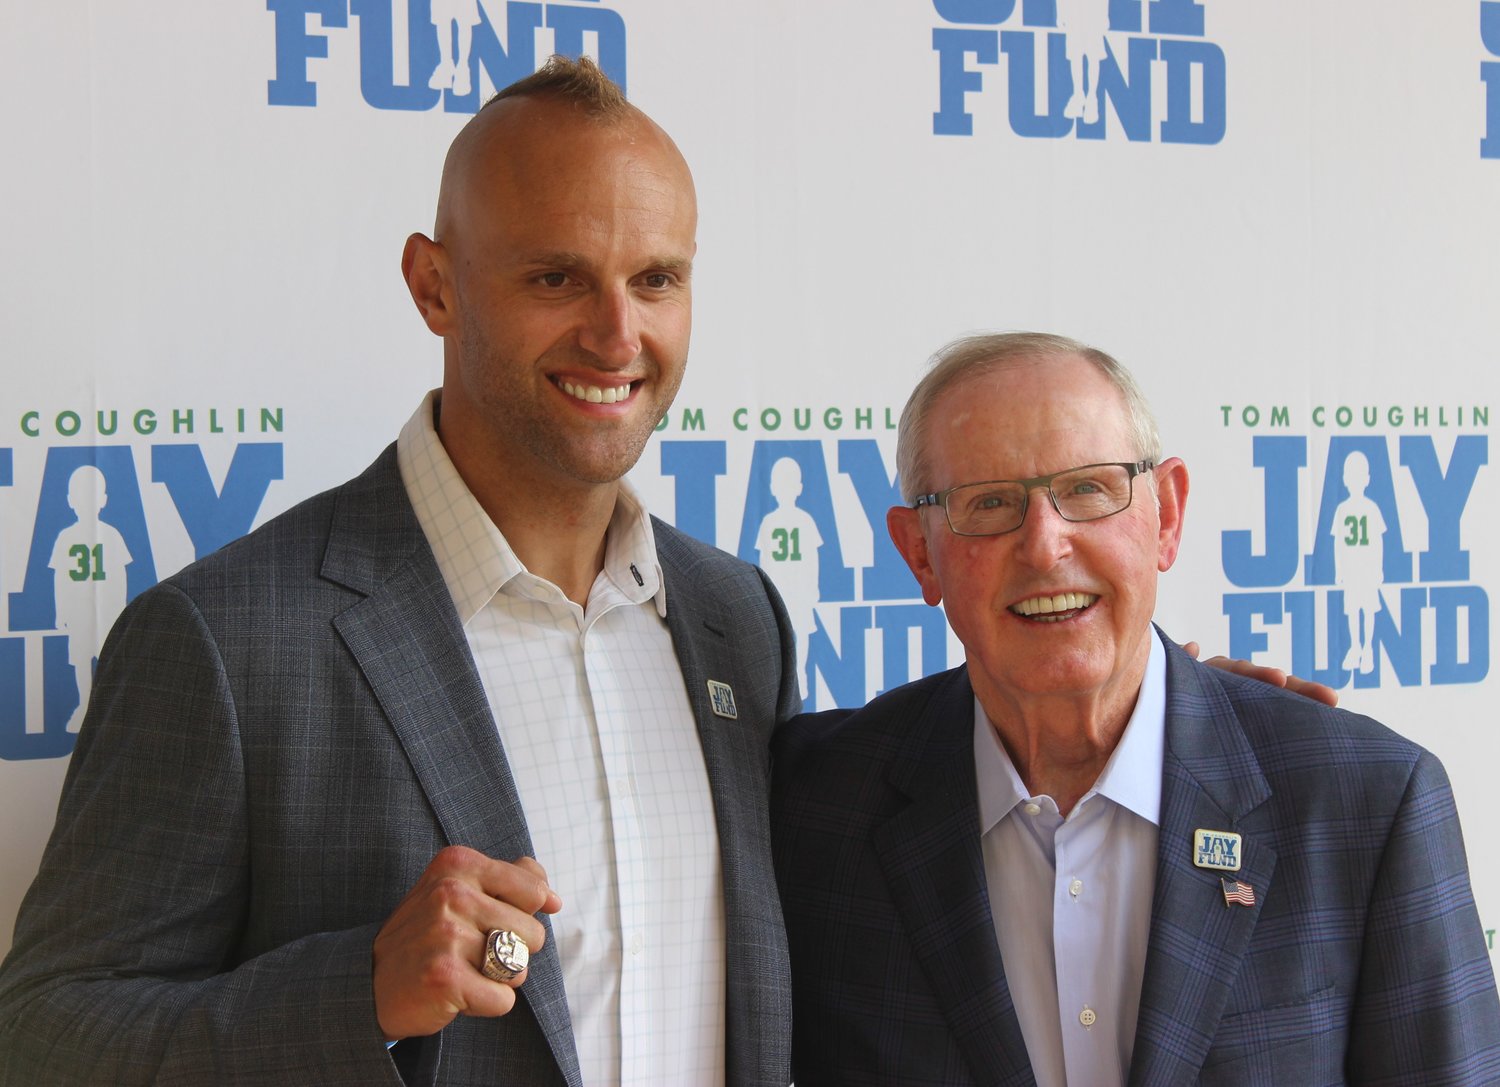 Mark Herzlich shows his Super Bowl ring while standing next to Coach Tom Coughlin.